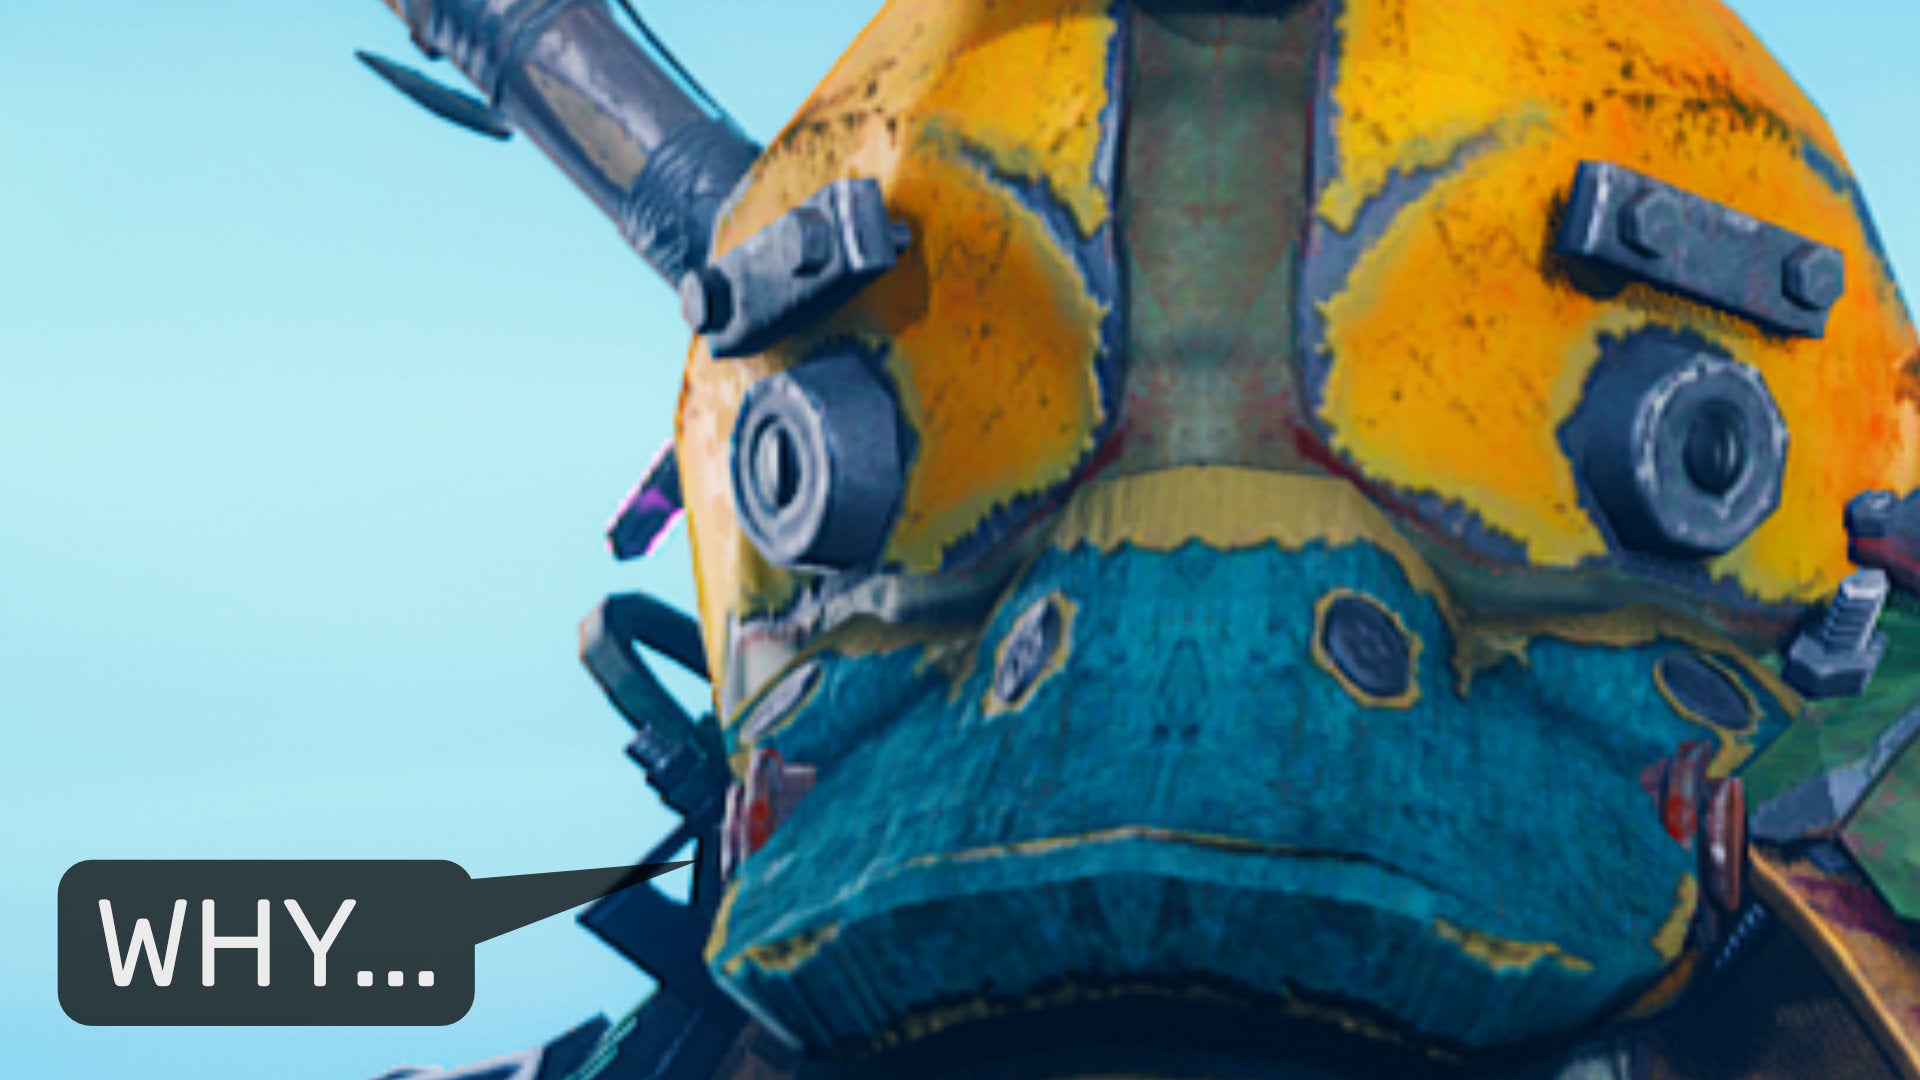 A close-up screenshot of the main character in Biomutant wearing a duck helmet, with a speech bubble next to them that says "Why...".